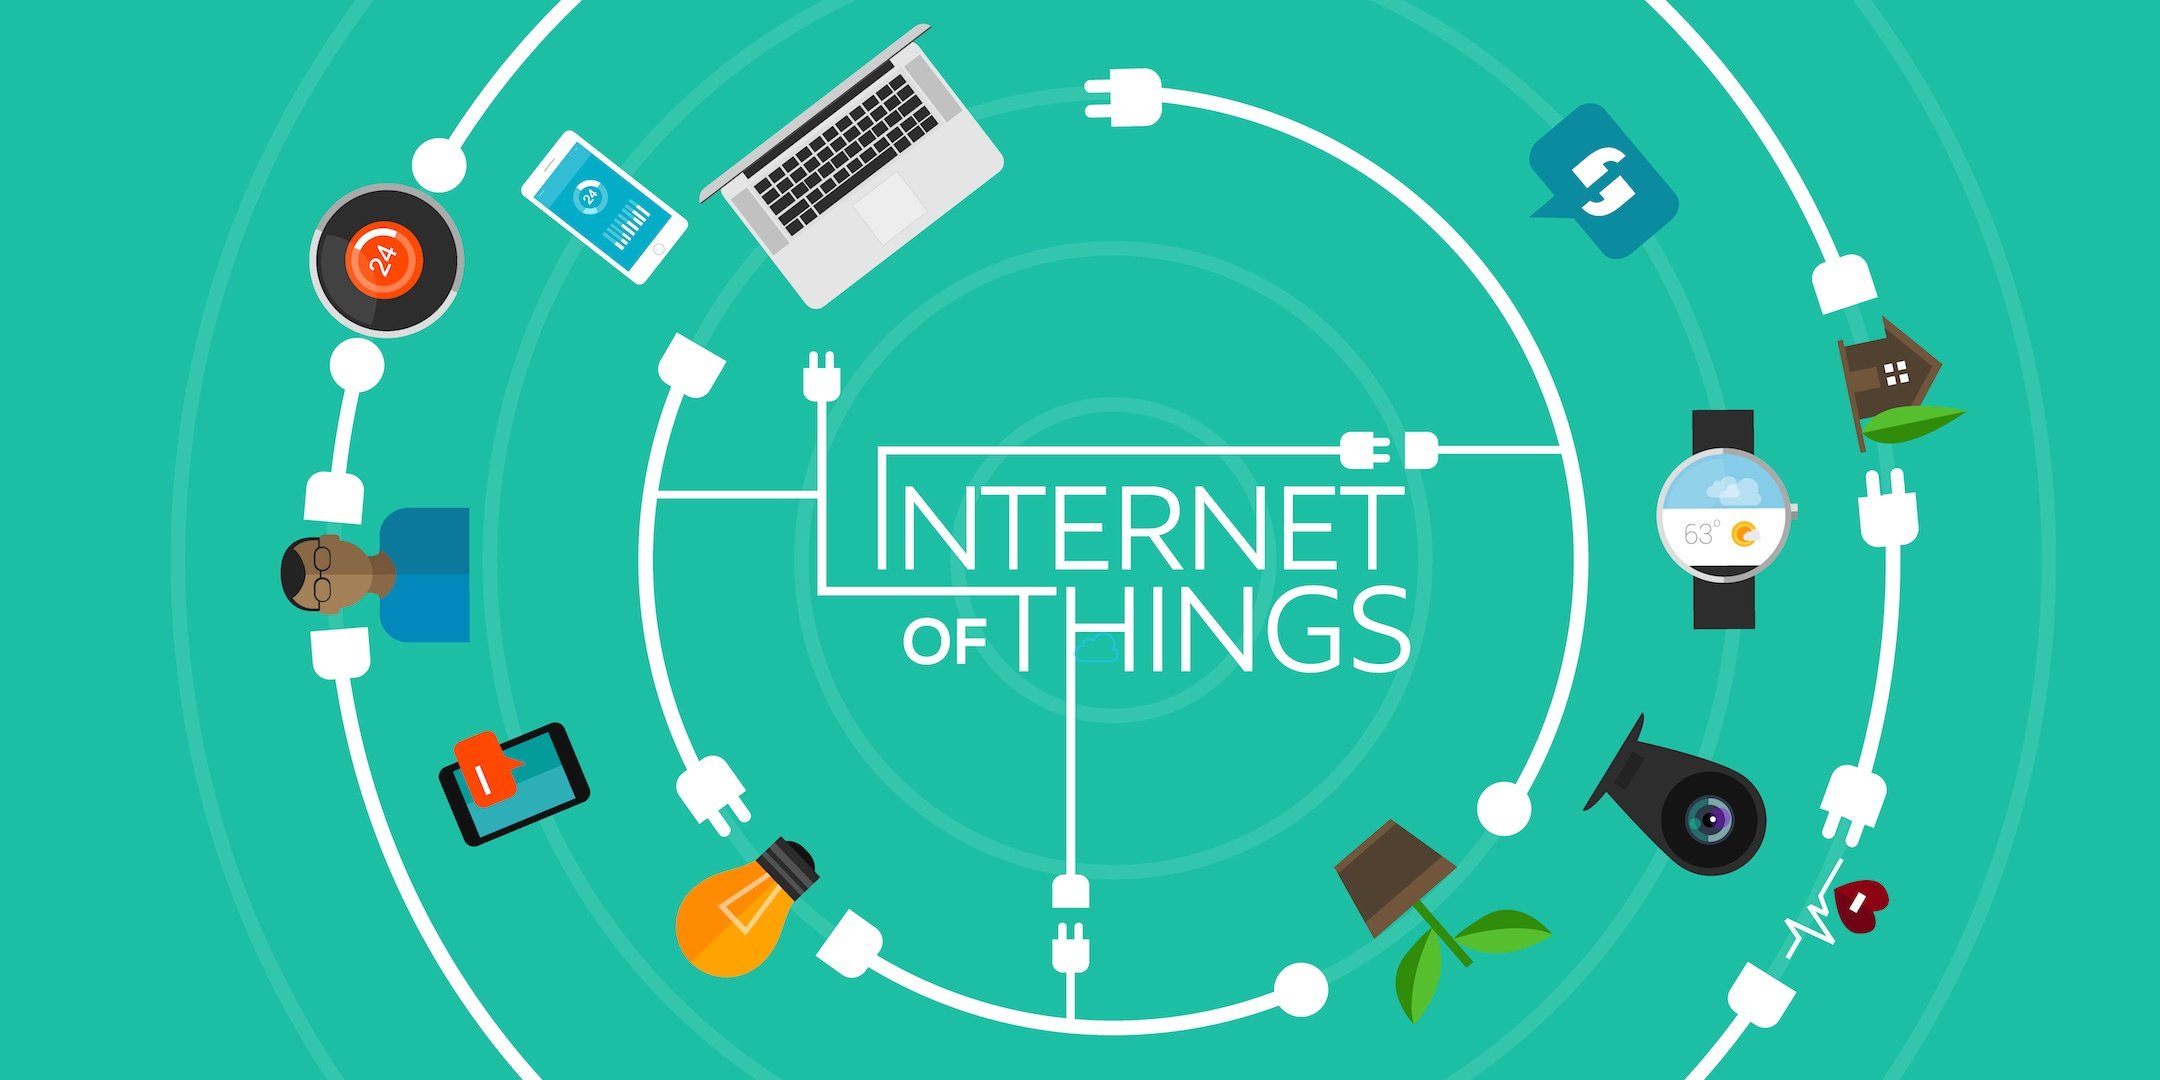 Real life examples of IoT ruling the world